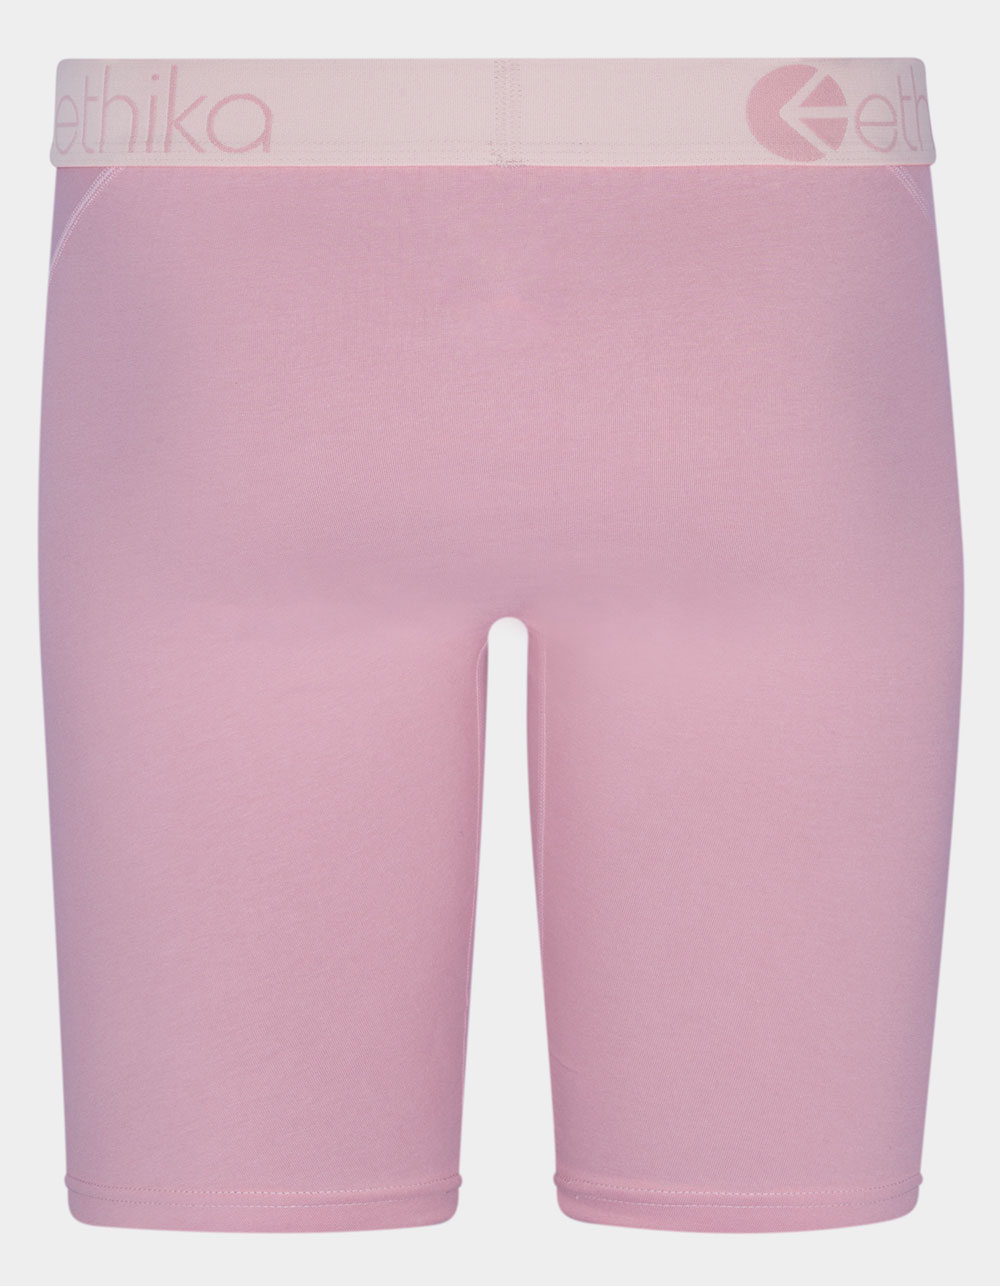 Pink Boxers briefs for Men